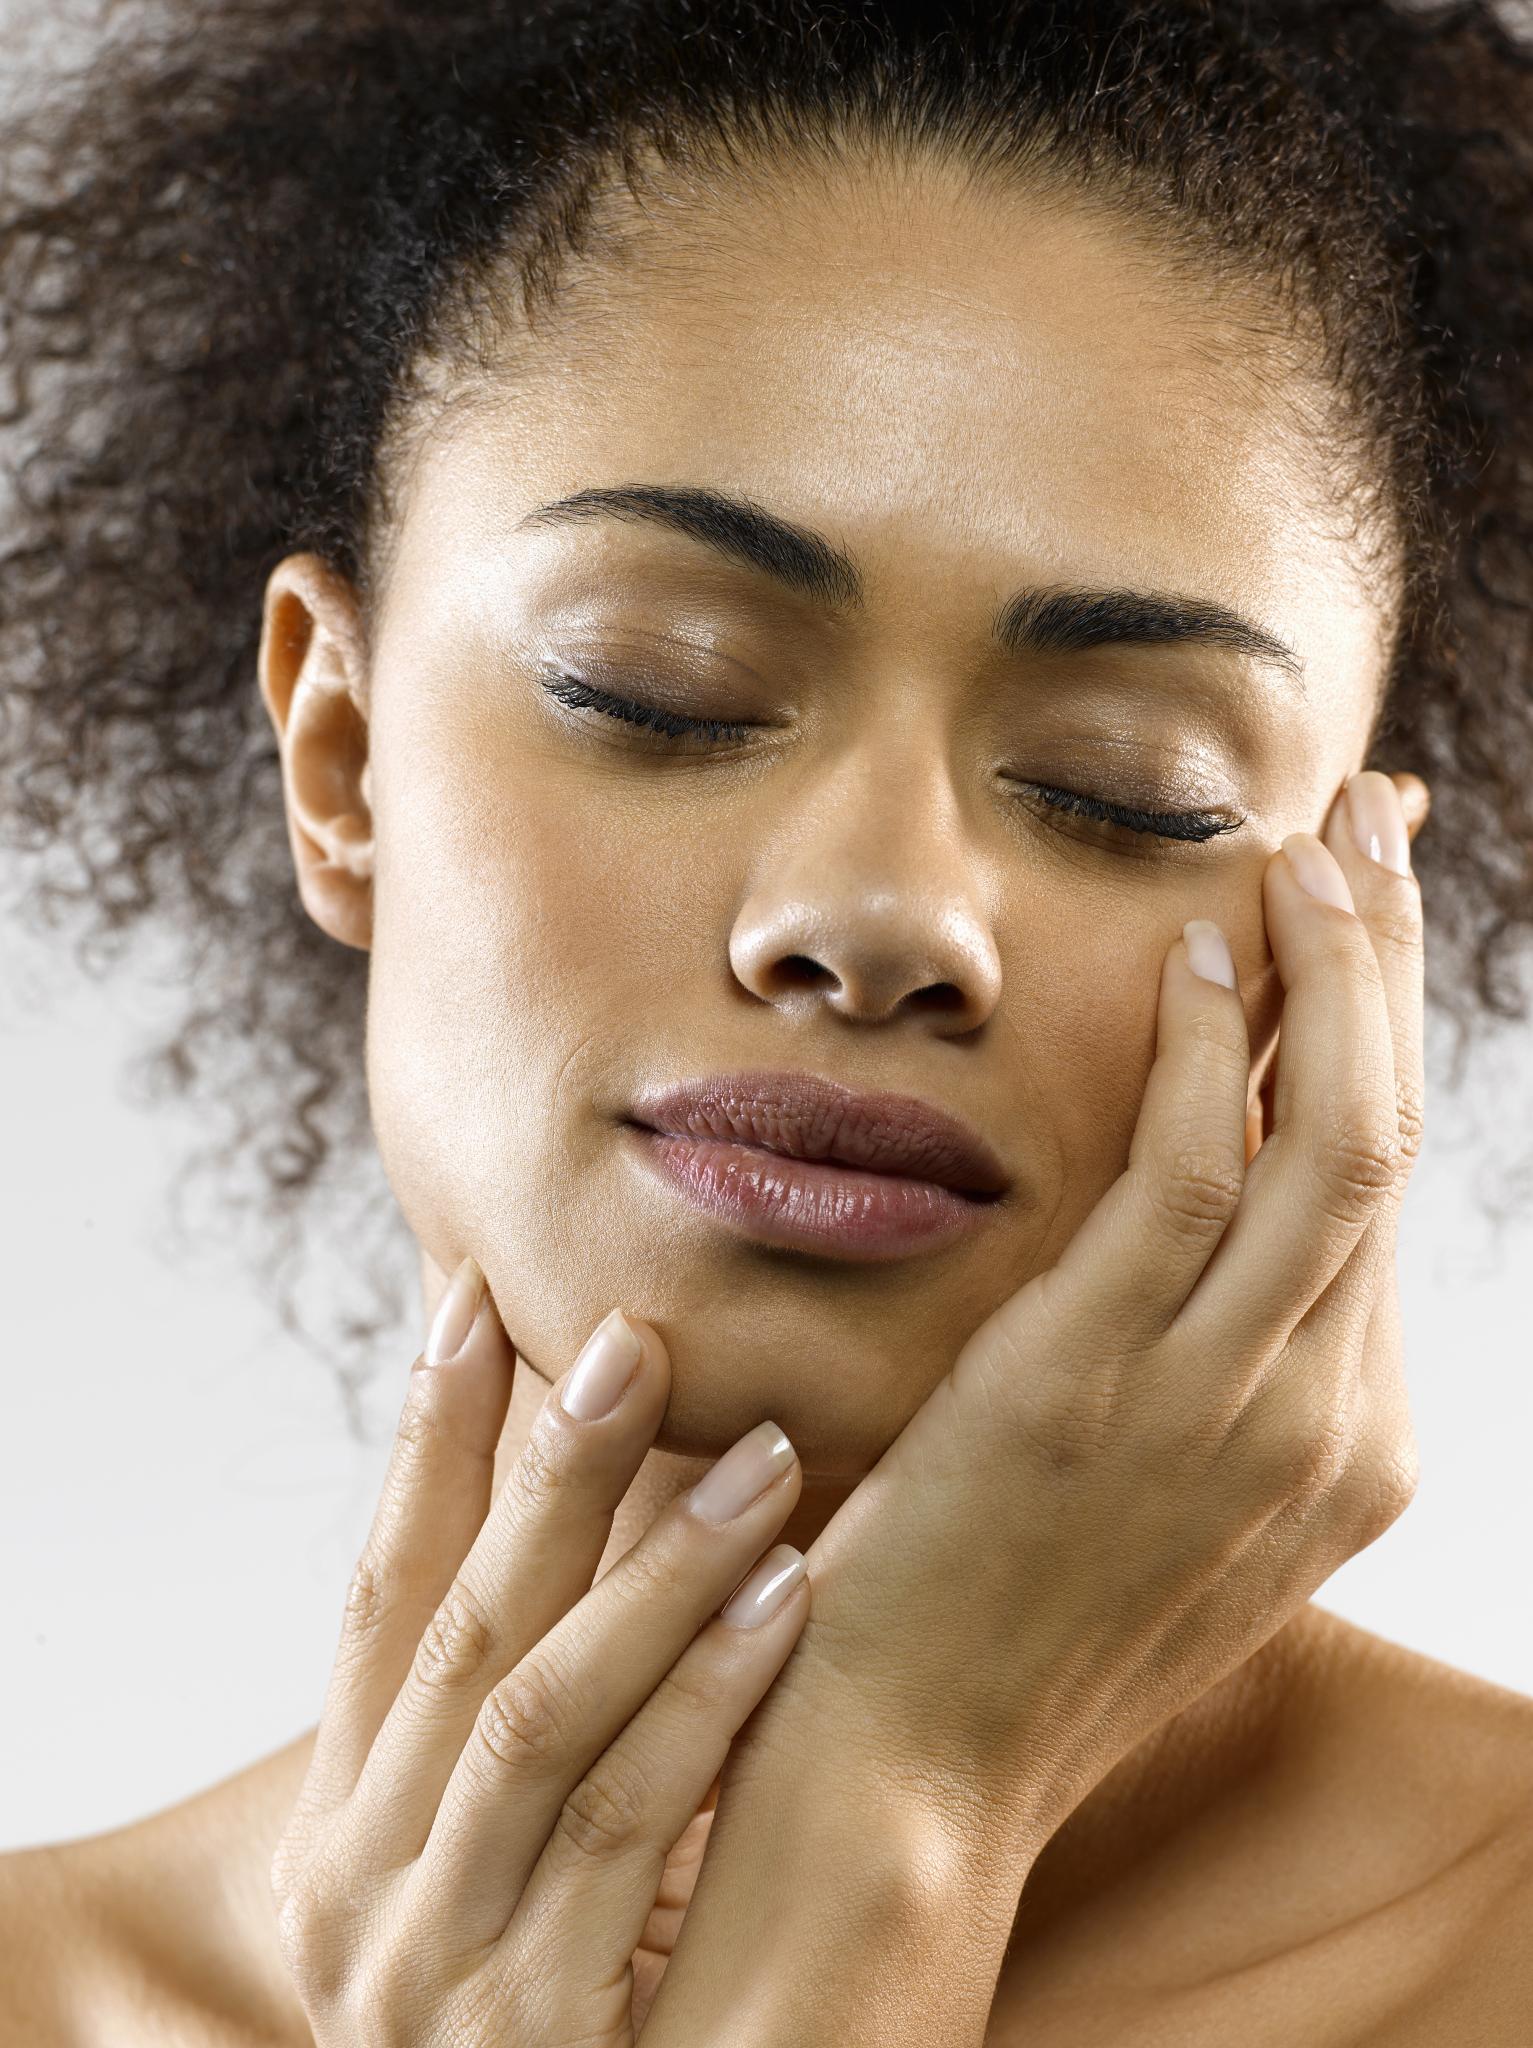 Beauty Myth Debunked: Is Oil Bad for Your Face?